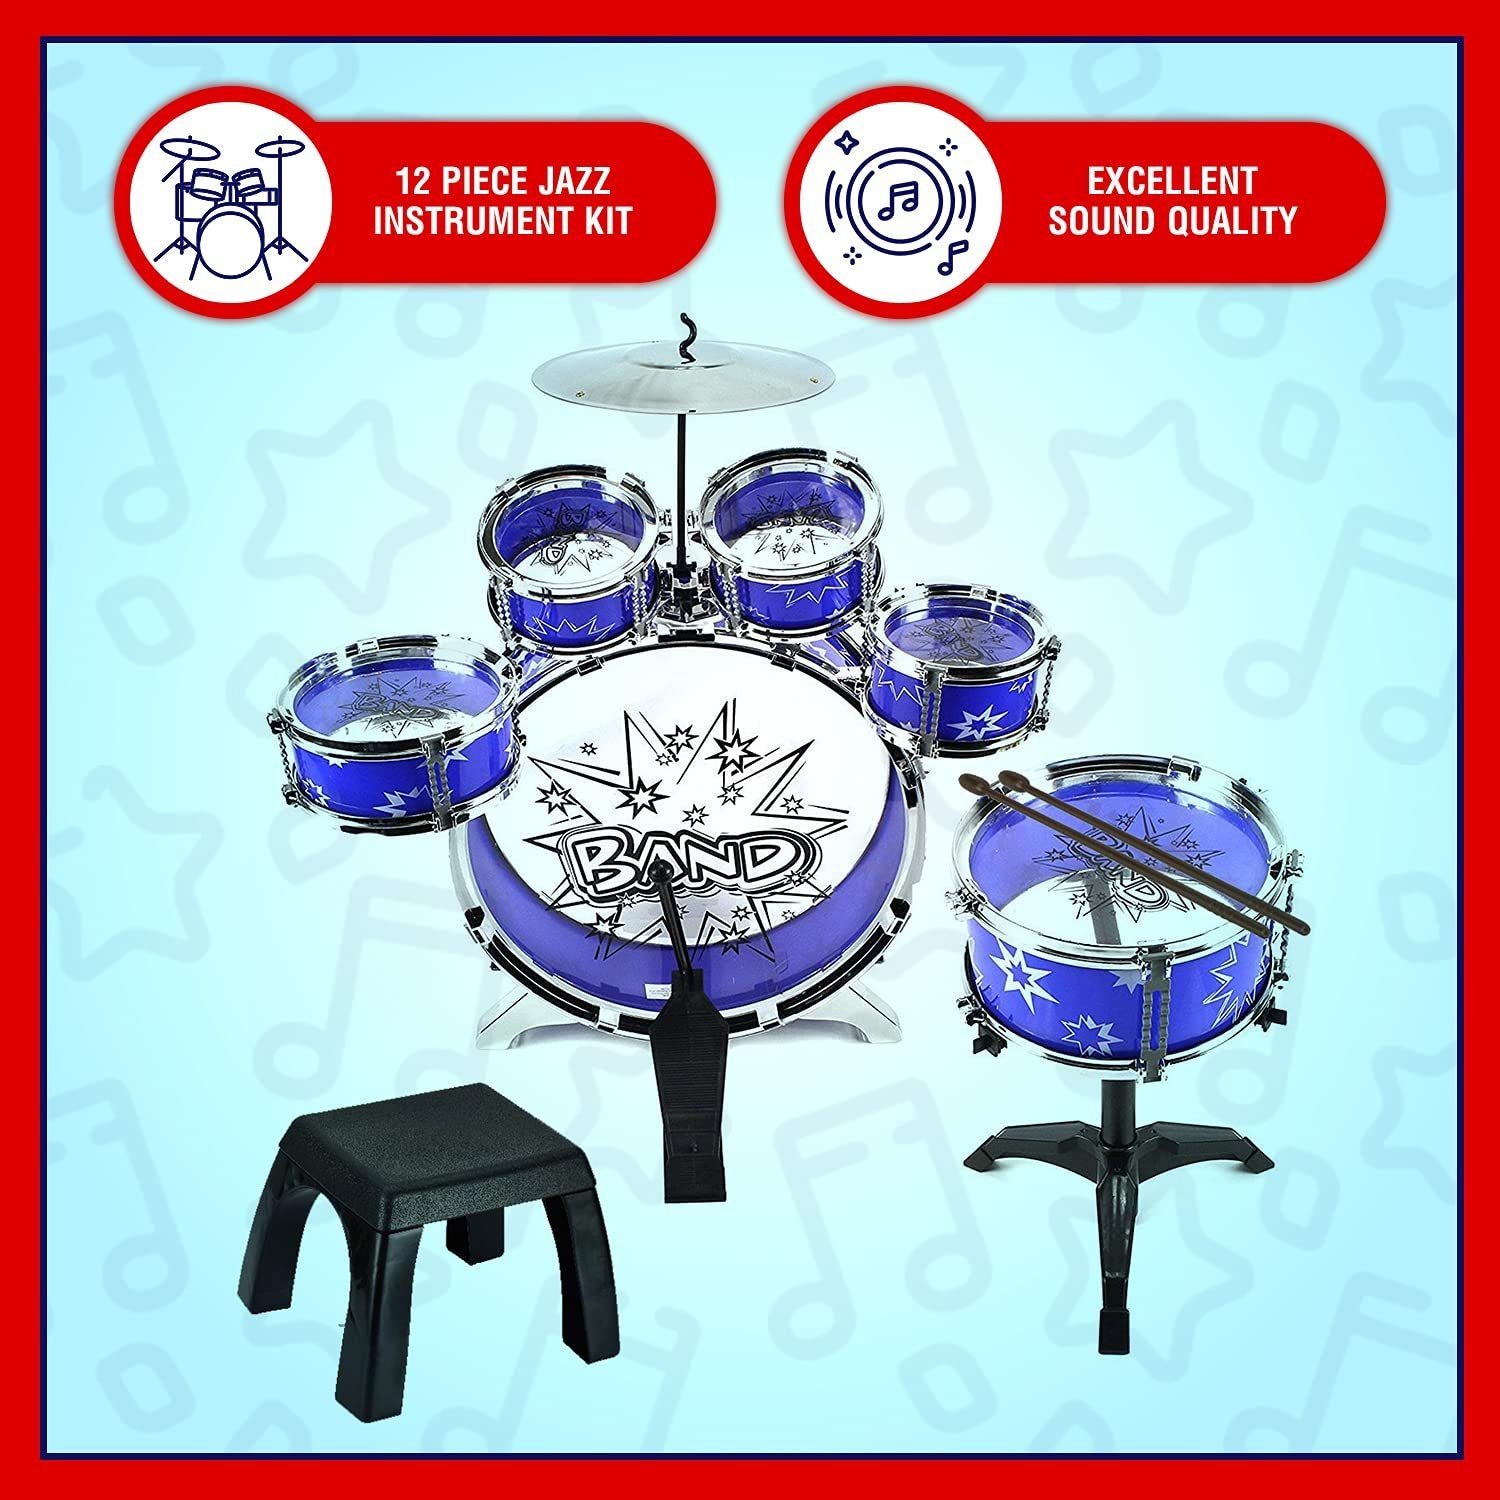 12 Piece Kids Jazz Drum Set - 6 Drums, Cymbal, Chair, Kick Pedal, 2 Drumsticks, Stool. Ideal Gift Toy for Kids, Boys & Girls